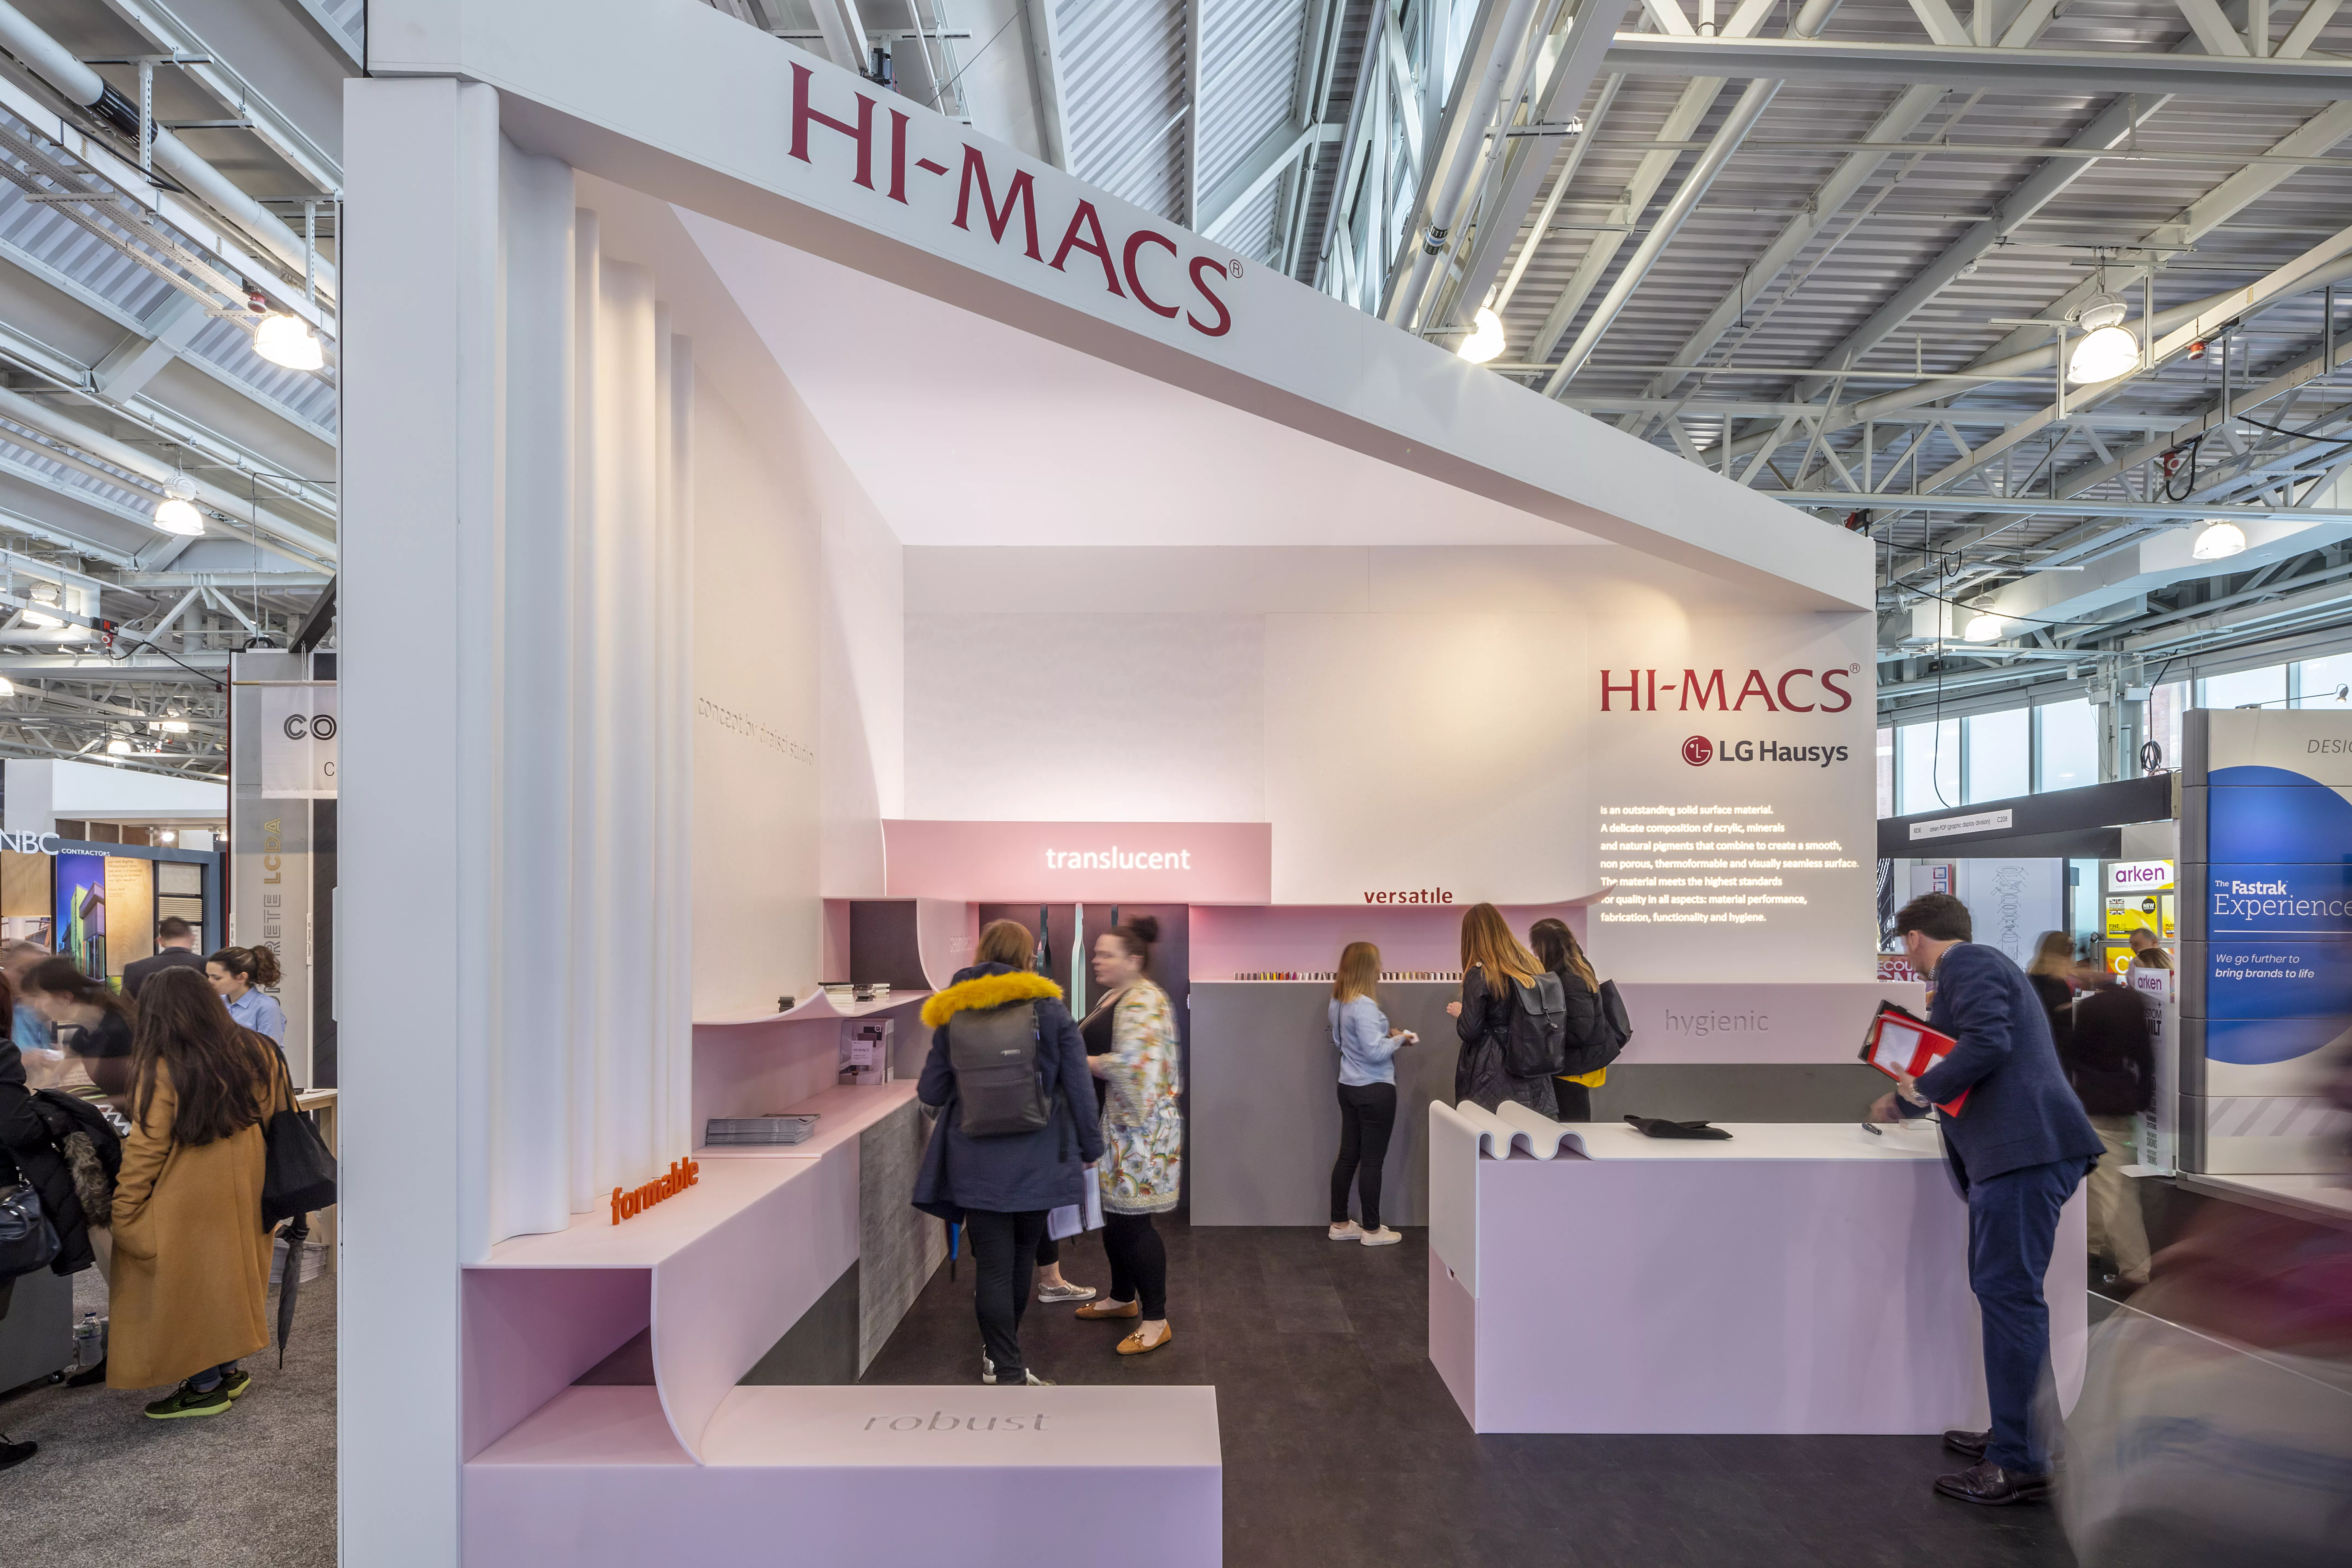 LX Hausys returns to Retail Design Expo with HIMACS Ultra-Thermoforming and 2018 colour collections